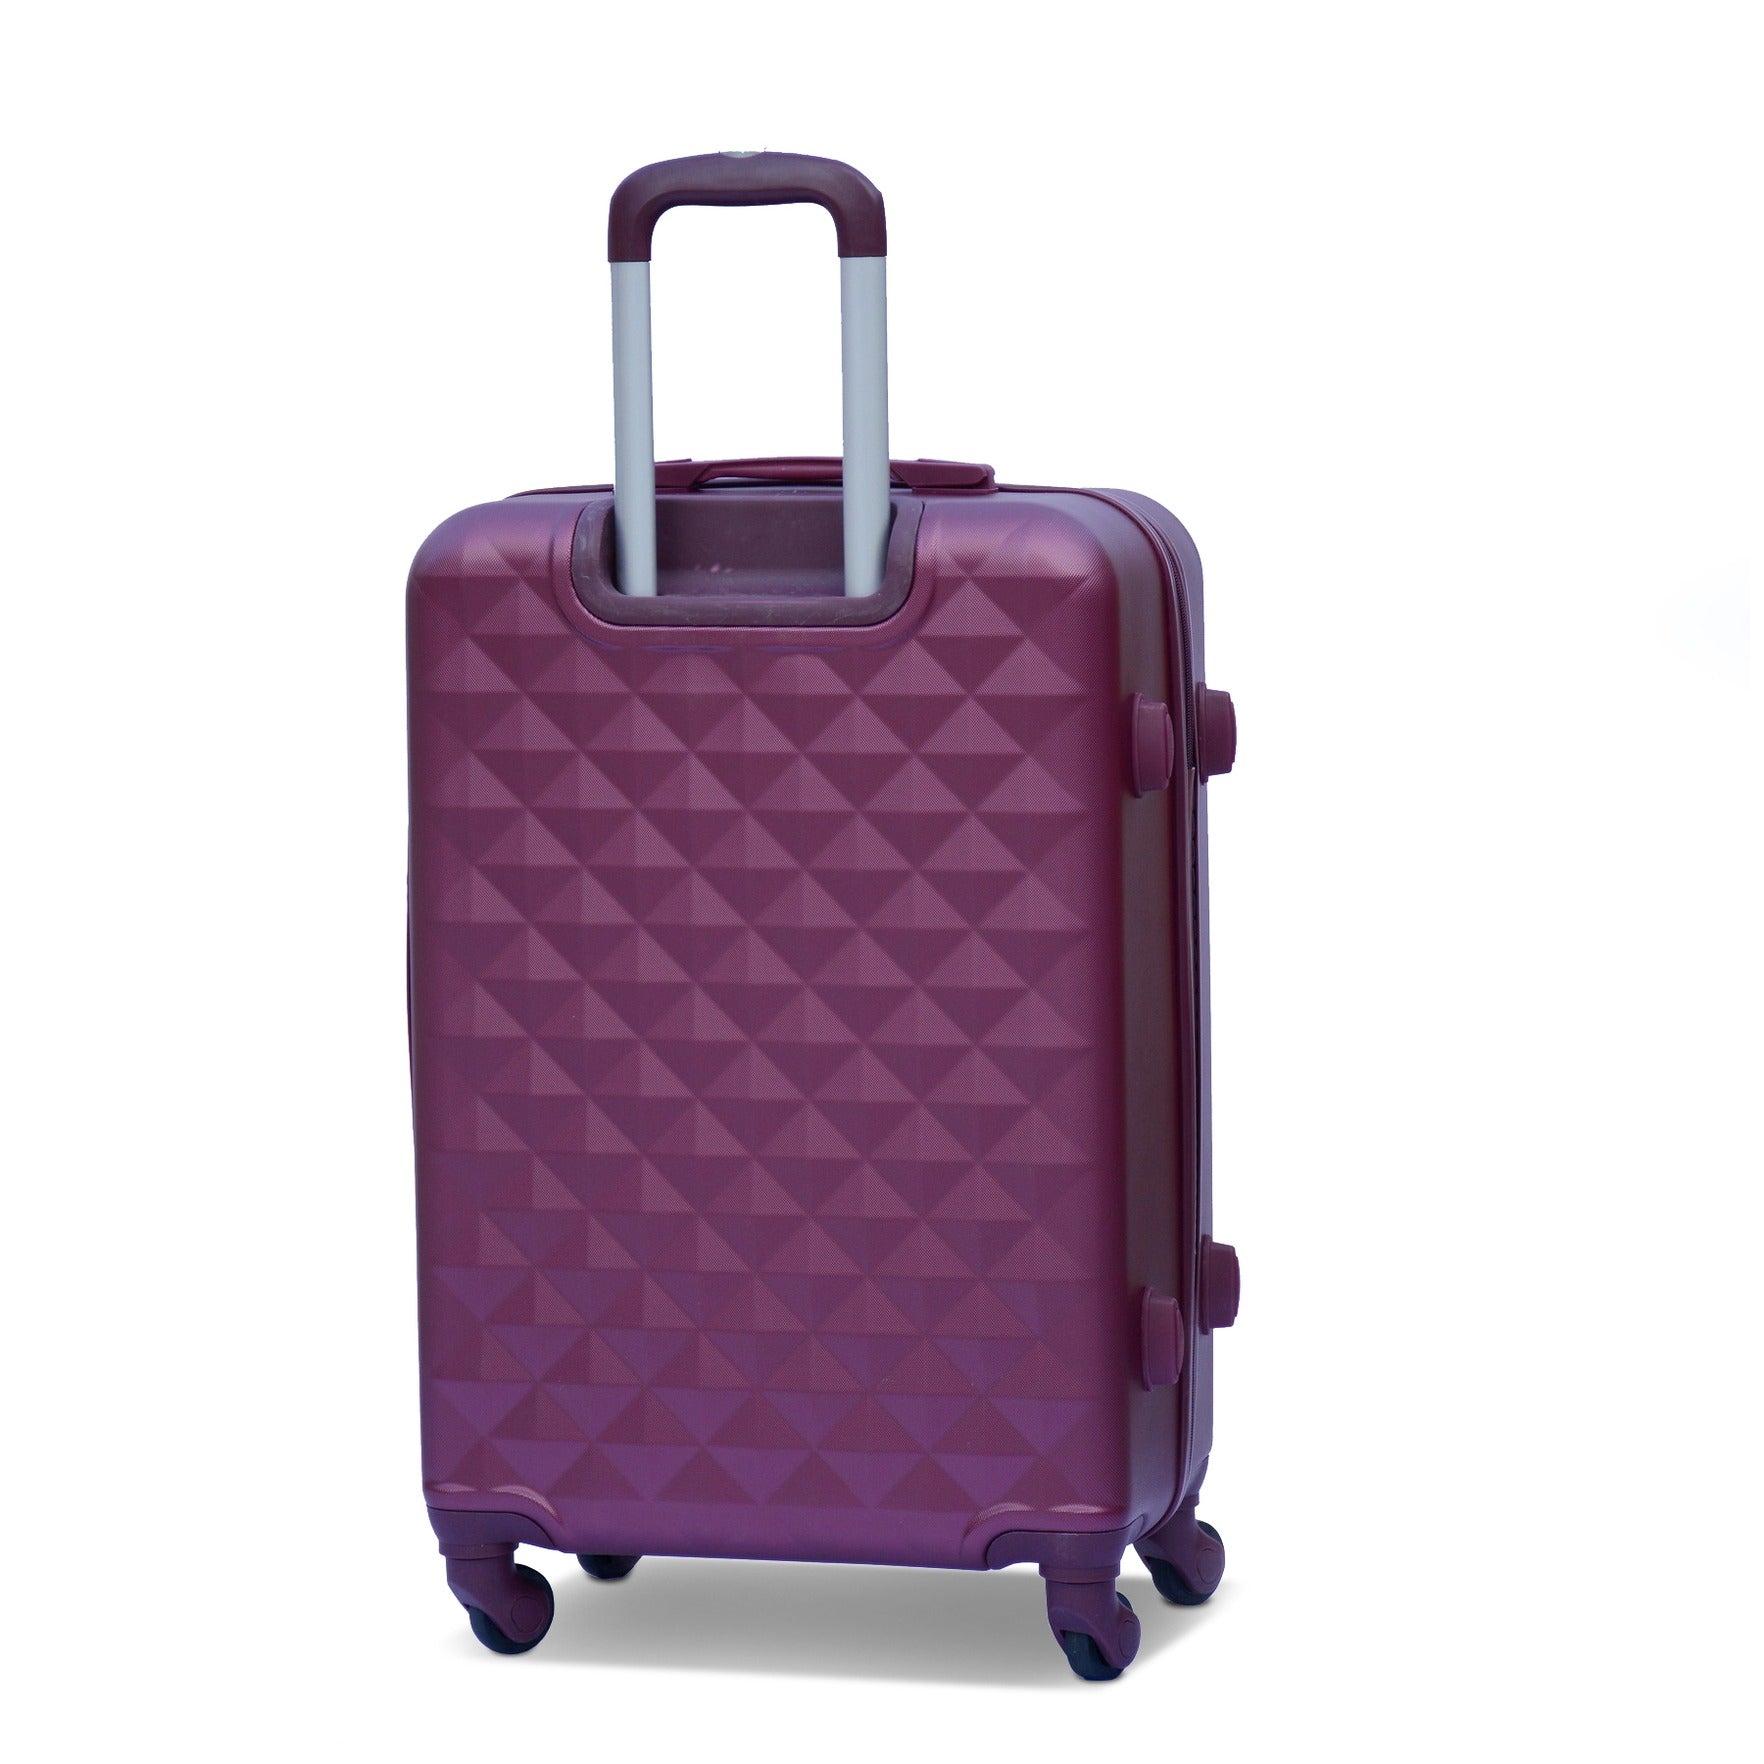 20" Diamond Cut ABS Lightweight Carry On Luggage Bag With Spinner Wheel